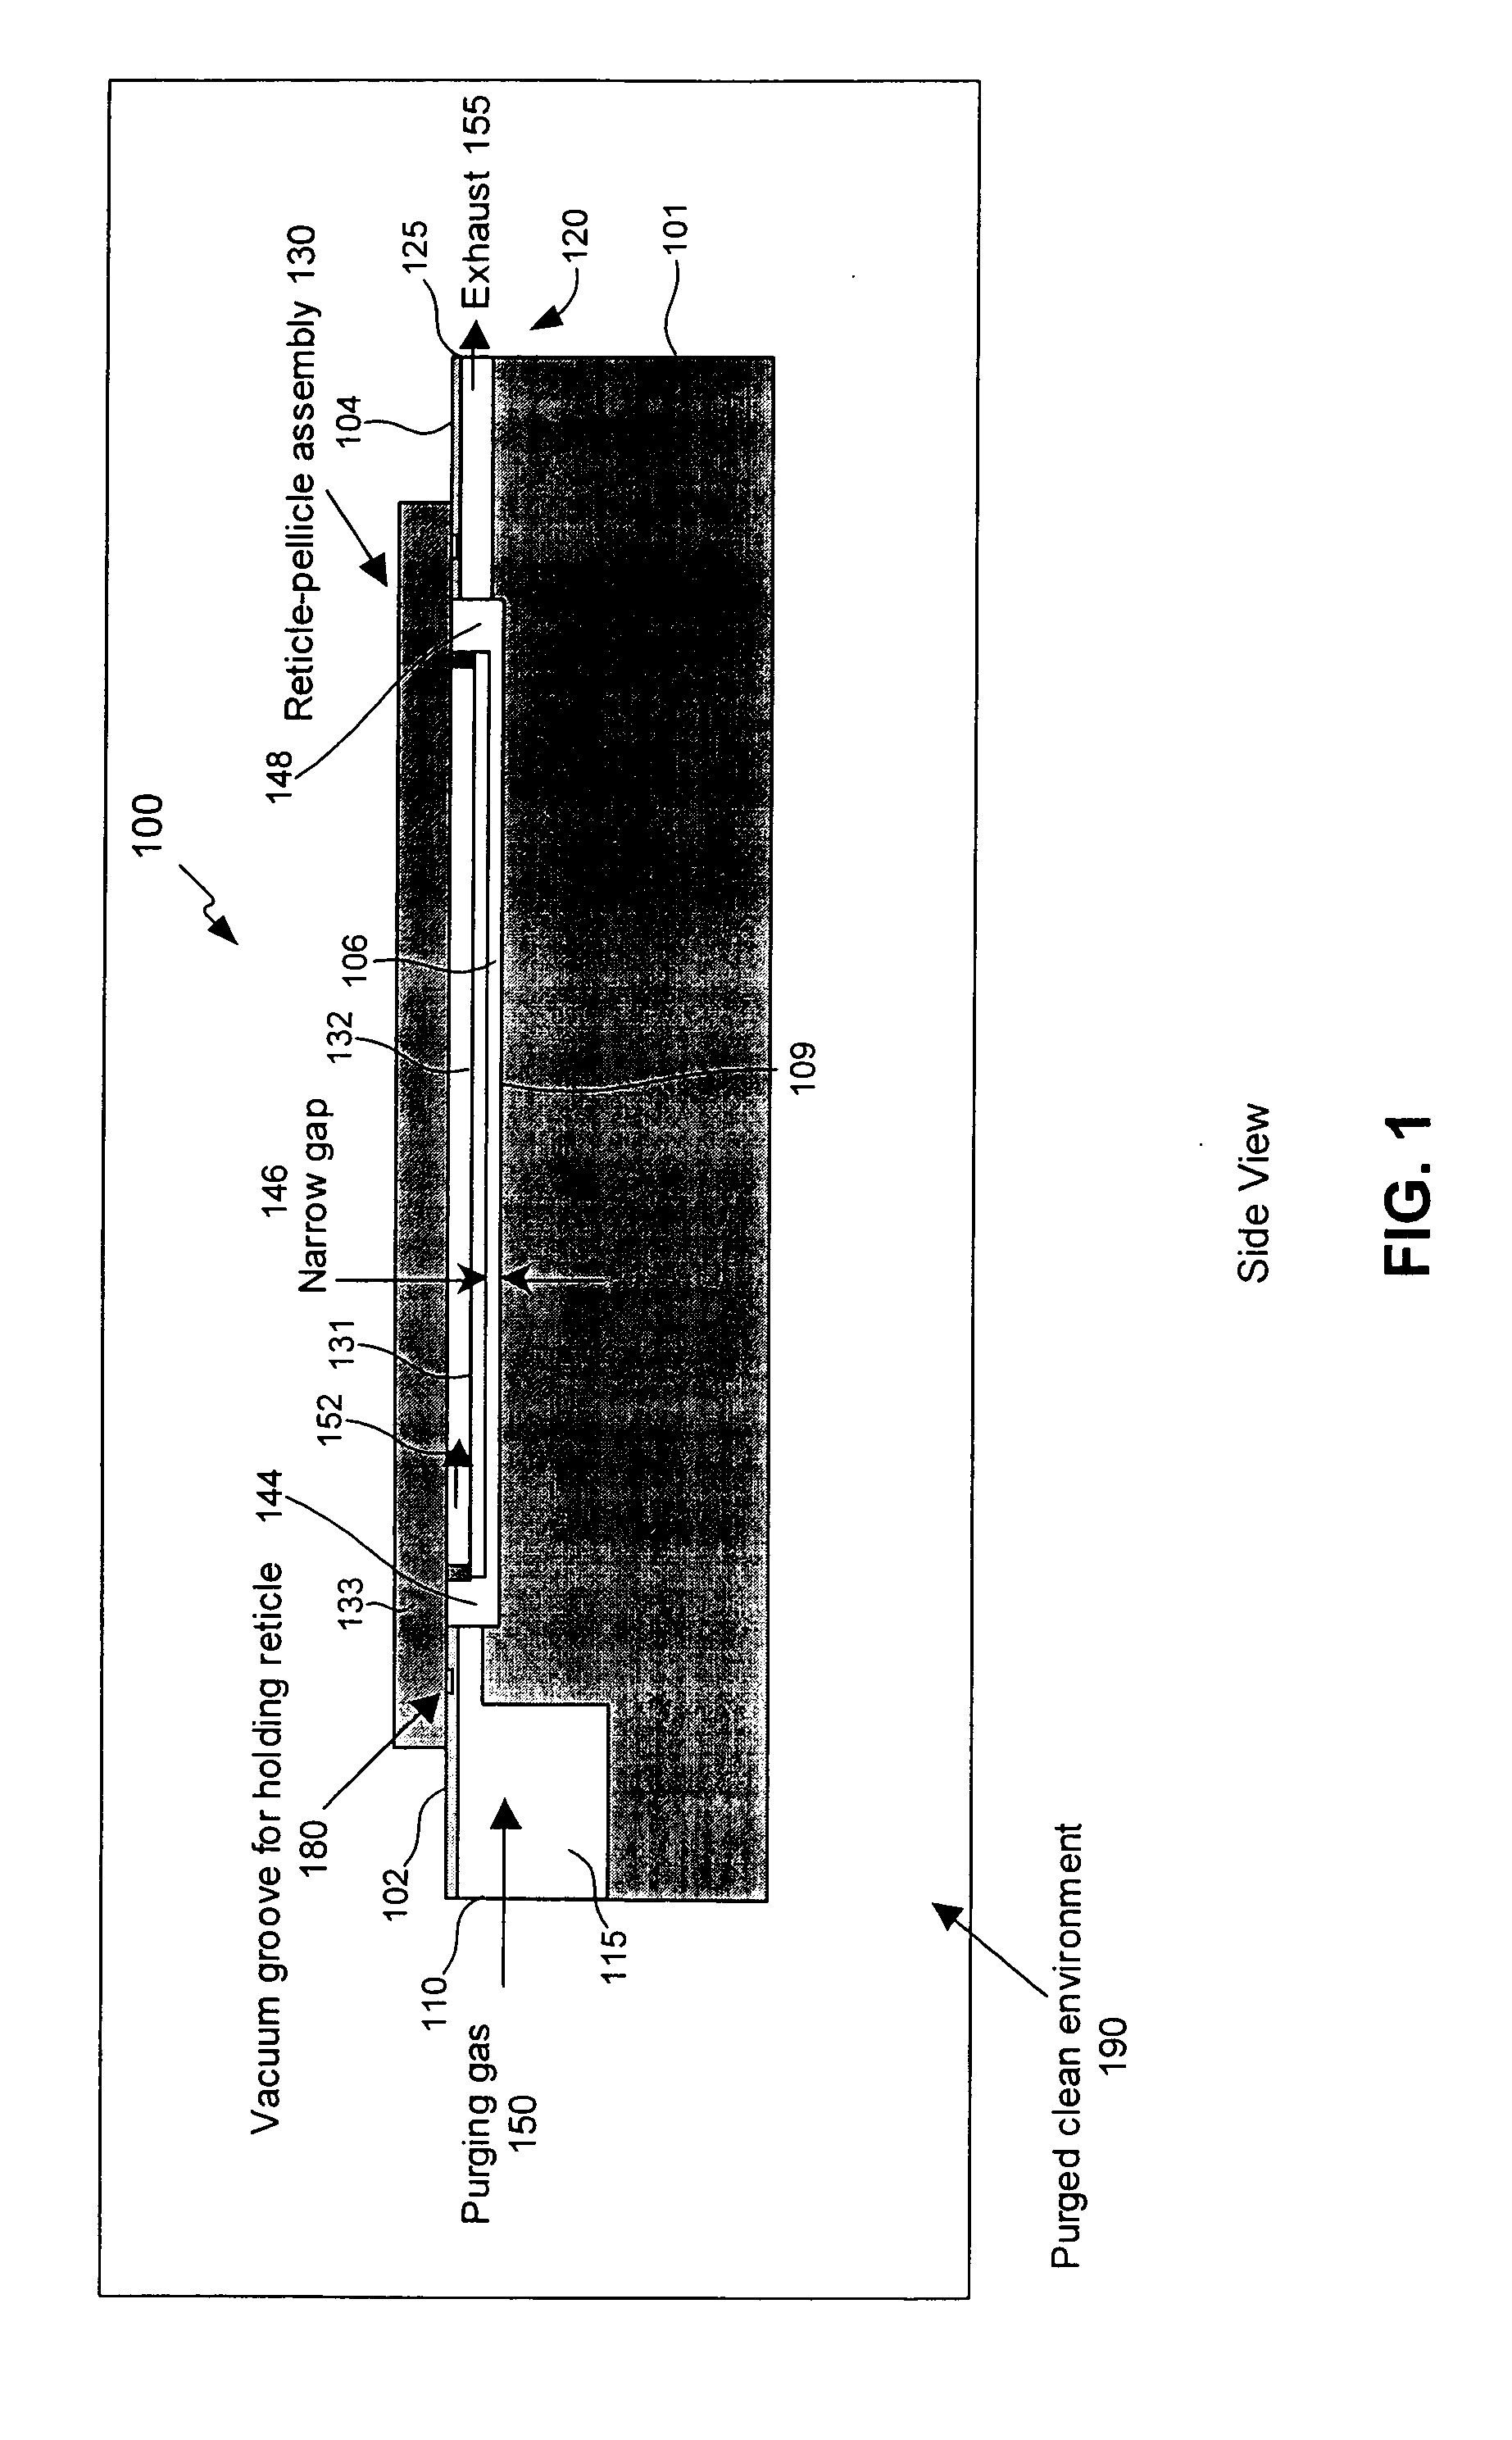 Method and system for active purging of pellice volumes